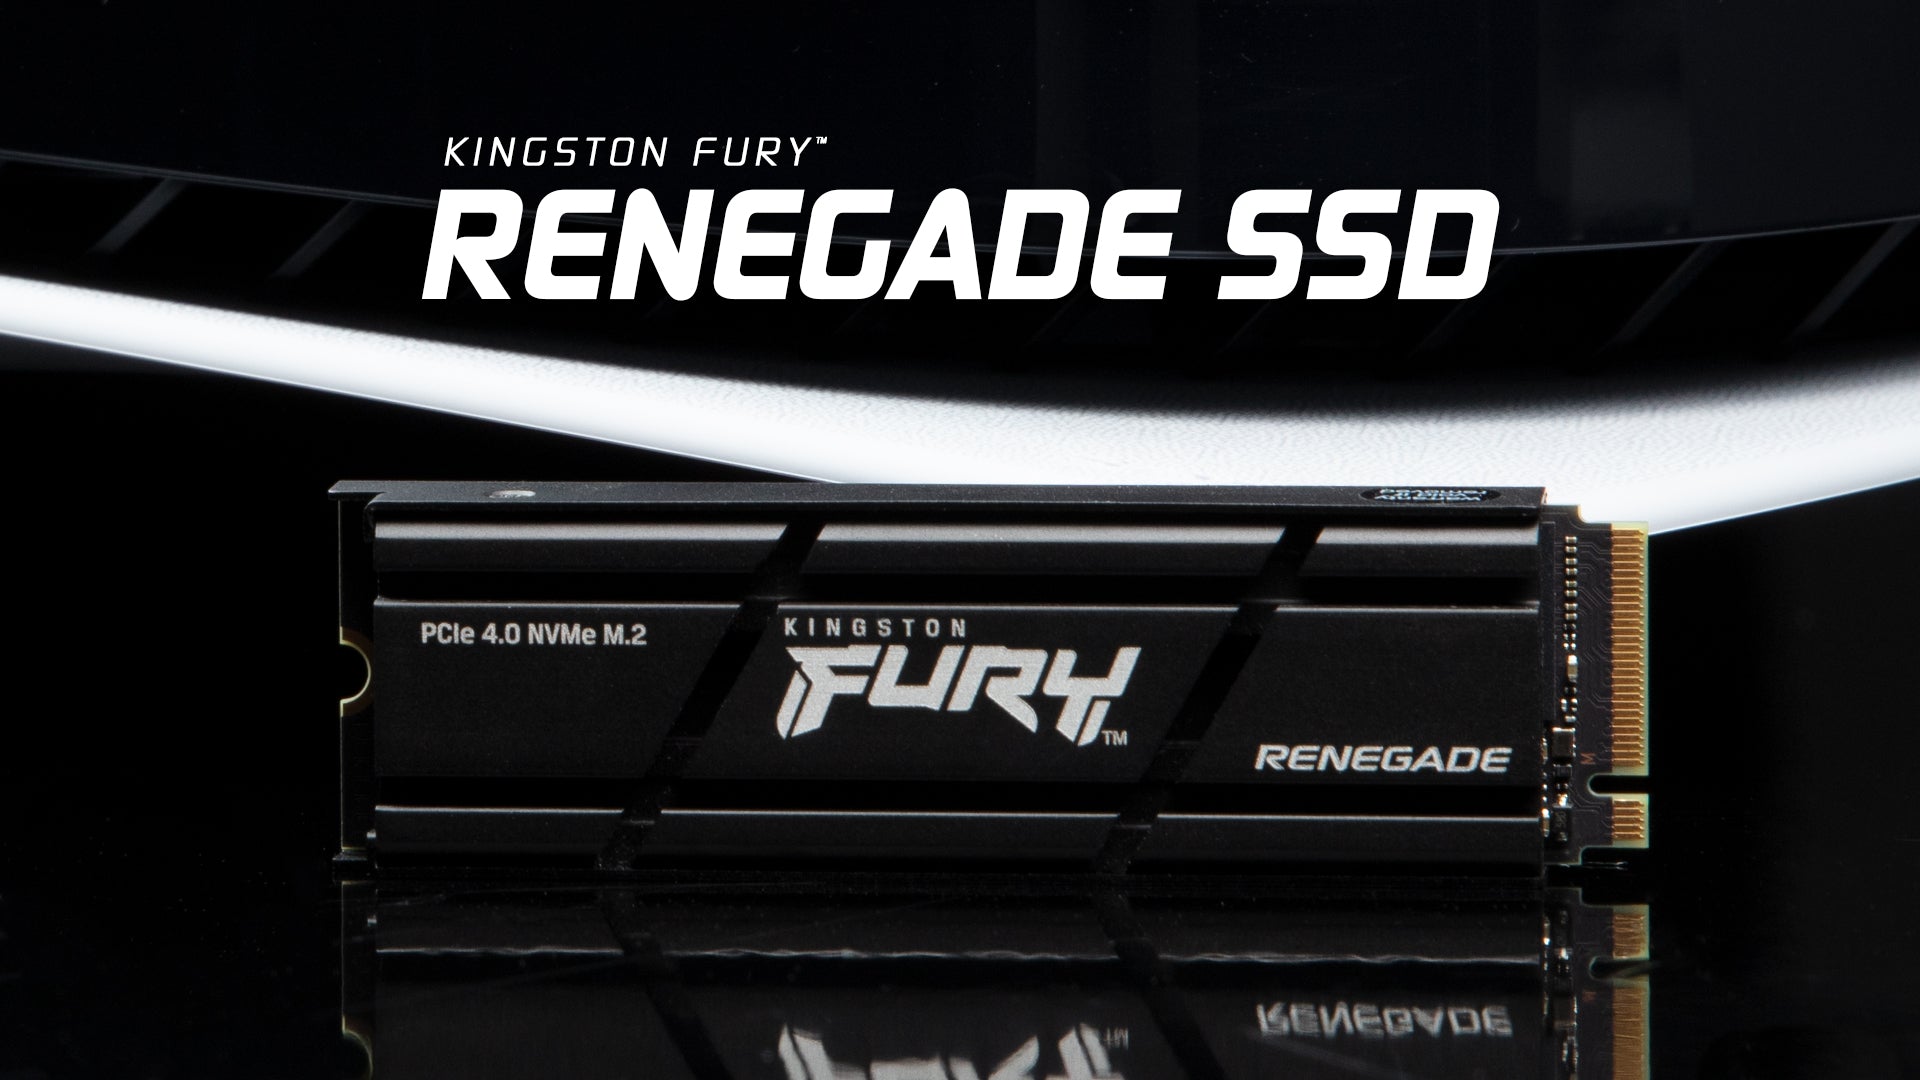 Kingston FURY Renegade NVMe SSD - Elevate Gaming Performance up to 7300MB/s  – Kingston Technology